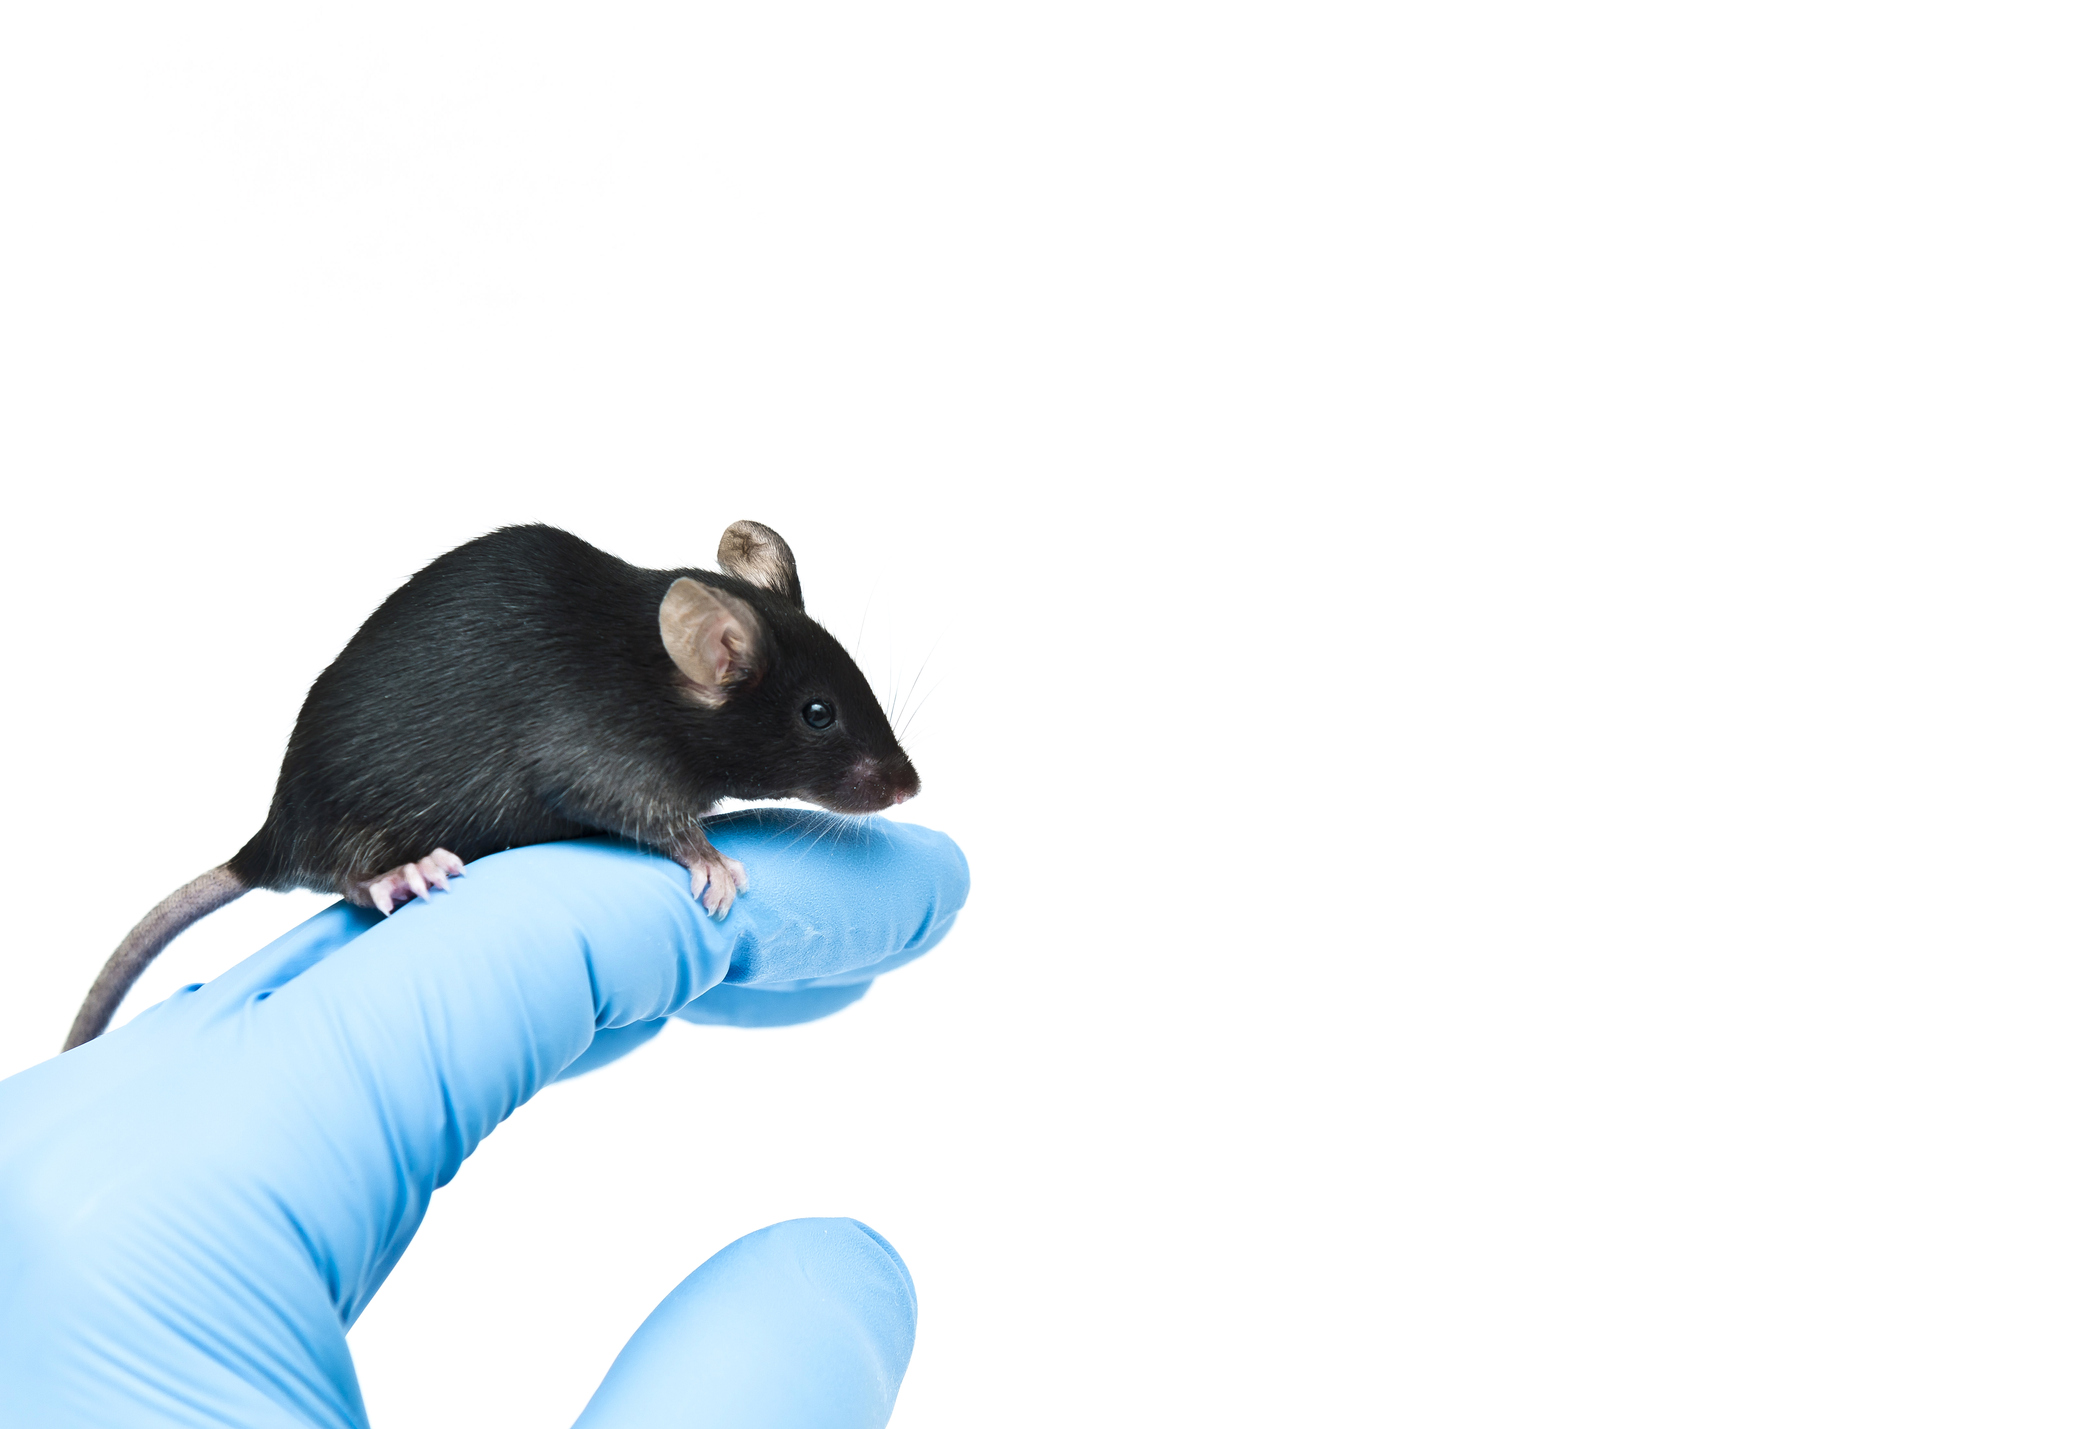 Black mouse on gloved hand